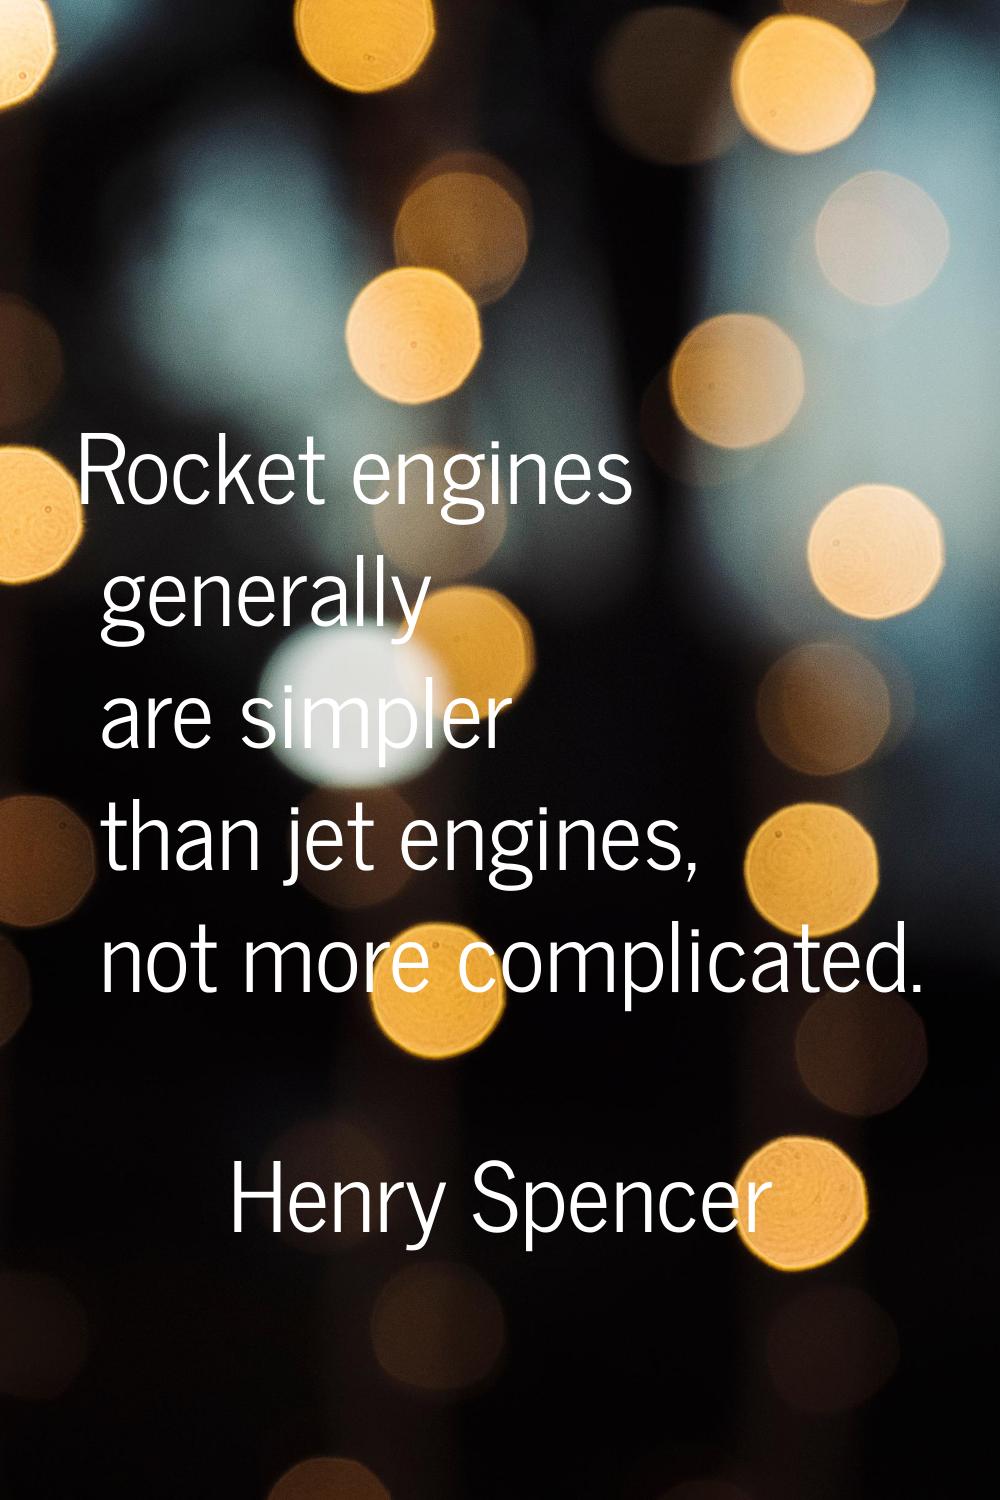 Rocket engines generally are simpler than jet engines, not more complicated.